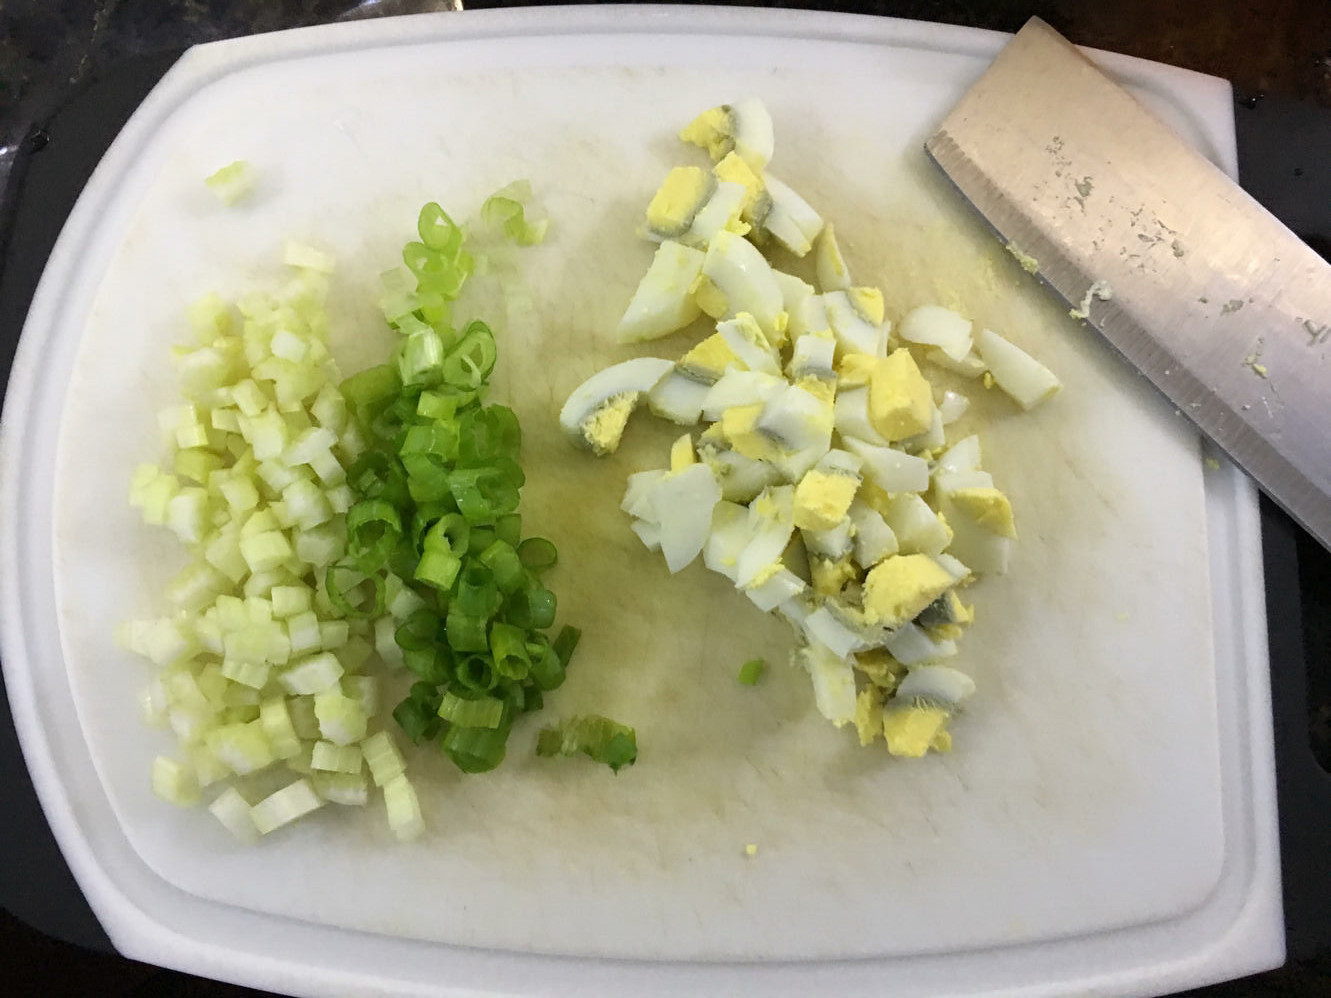 A picture of the chopped up ingredients